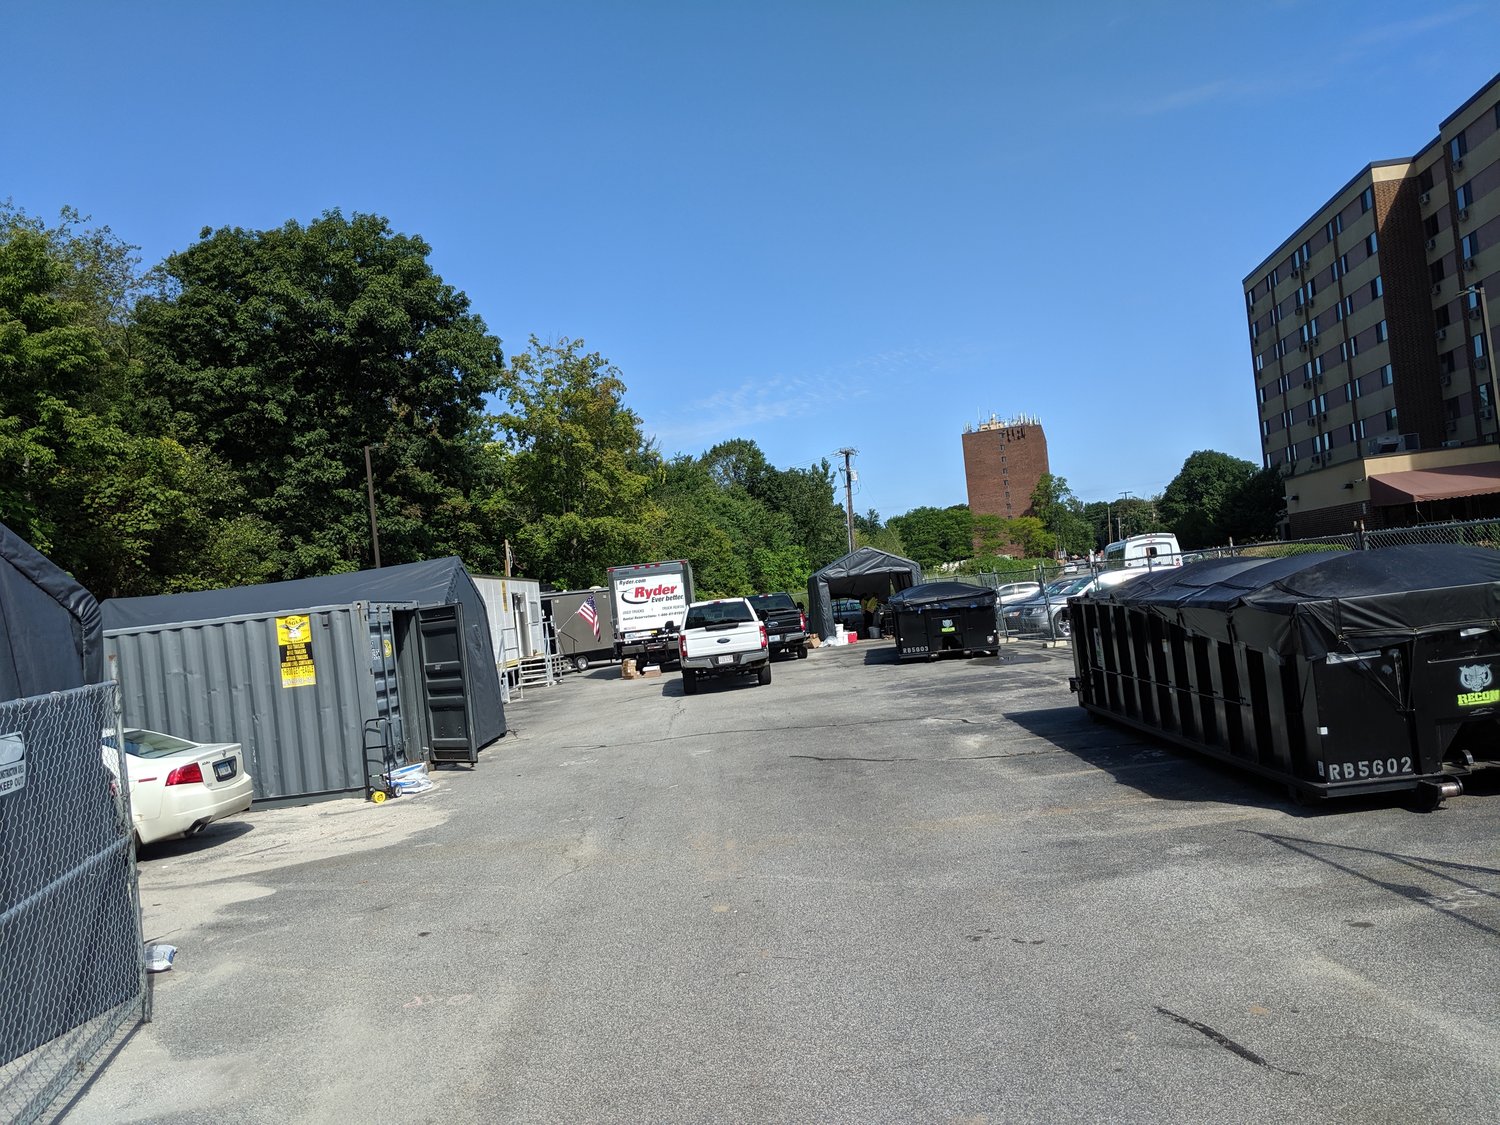 Acres of parking lot will be removed and capped to contain contaminated soil outside Centredale Manor and Brook Village Apartments in North Providence, near the Johnston line. (Tim Faulkner/ecoRI News)